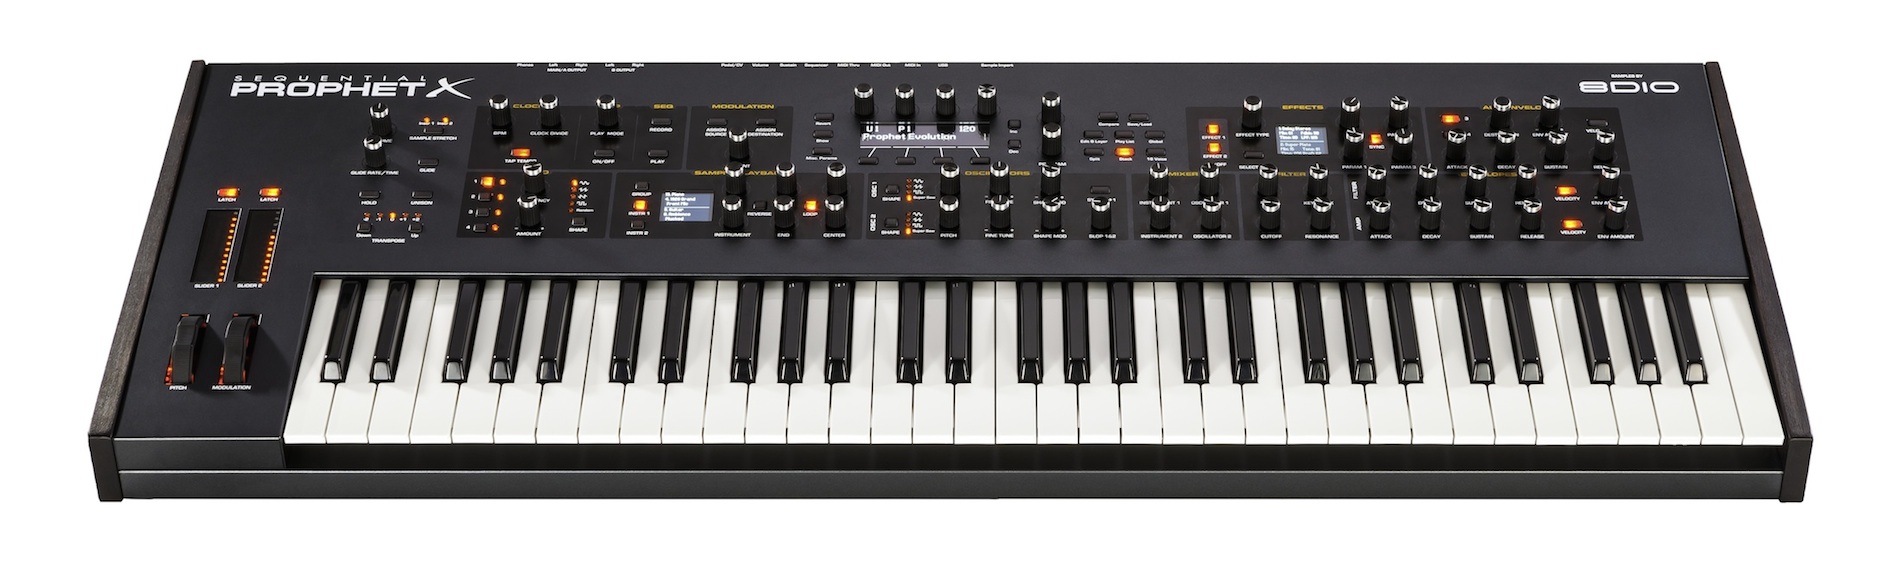 New Gear Alert: Sequential Prophet X Synth by Dave Smith, Thunderbolt 3 Option Card for UA Apollo, IK’s UNO Synth & More